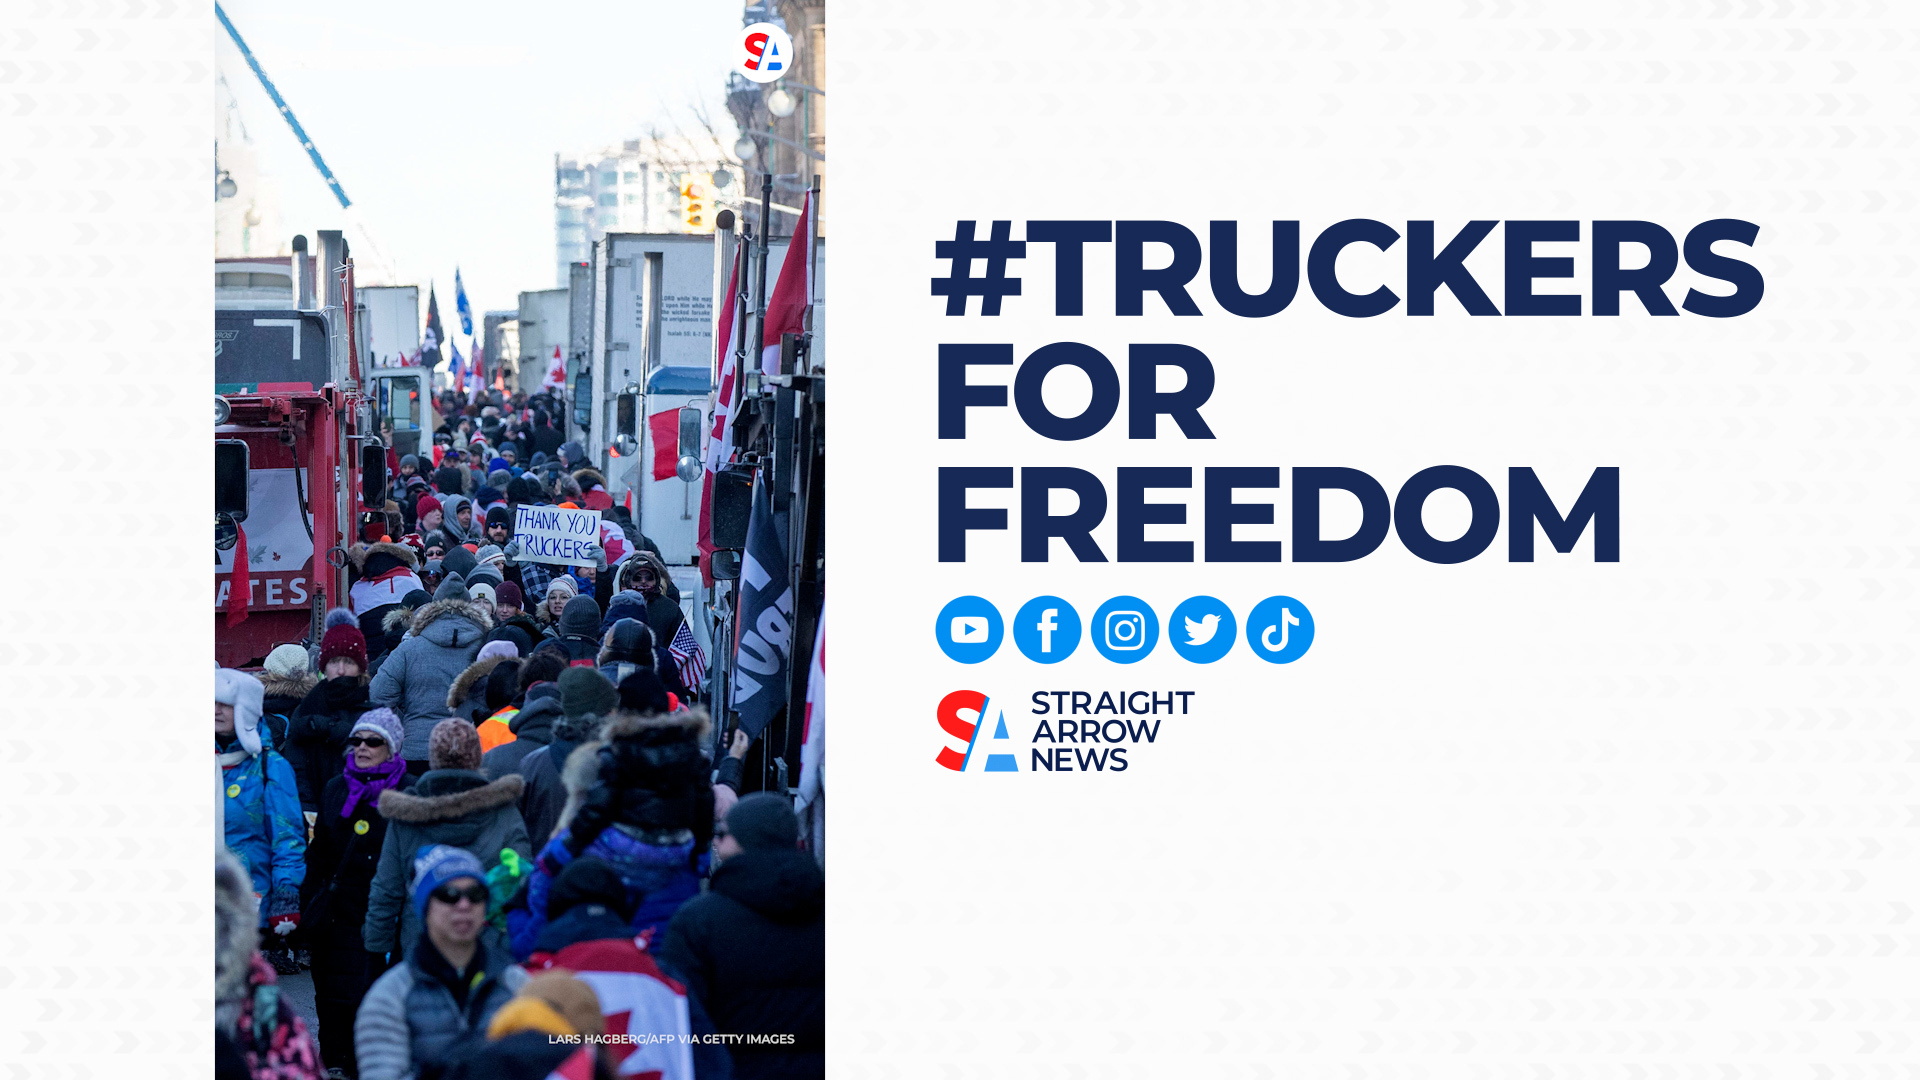 A protest involving a convoy of truckers in the Canadian capital of Ottawa has continued to gain support online.